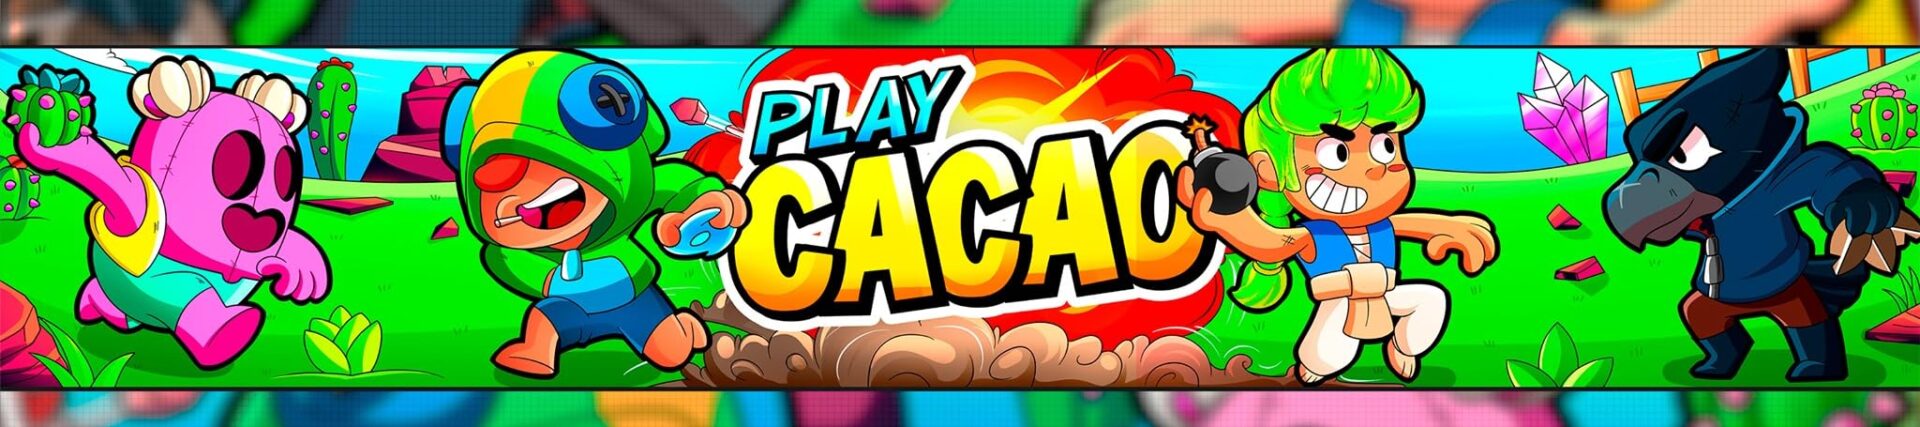 Banner Playcacao